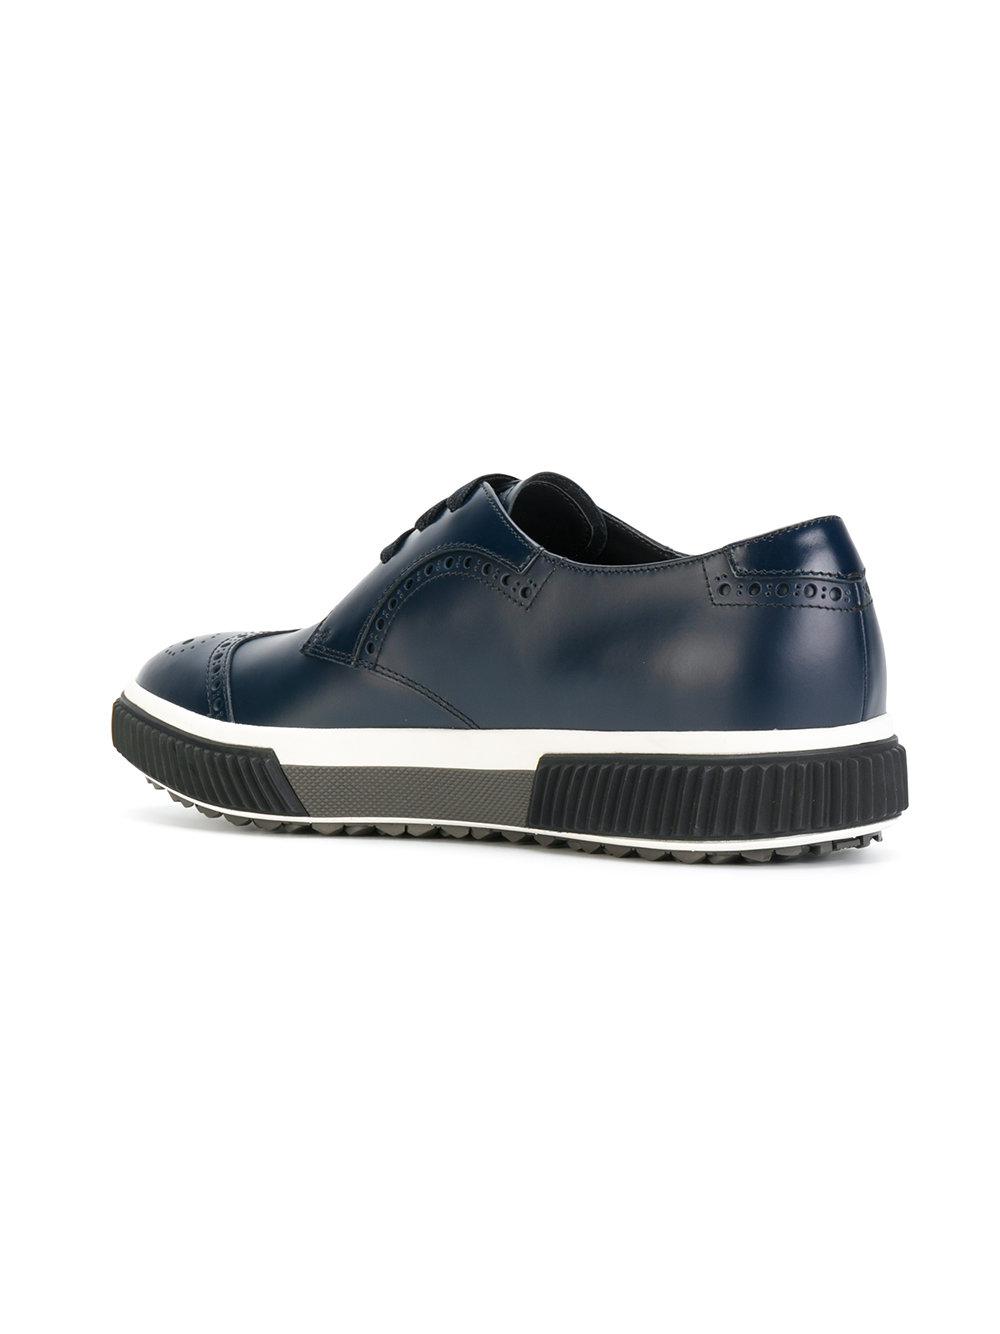 Prada Leather Classic Lace-up Shoes in Blue for Men - Lyst